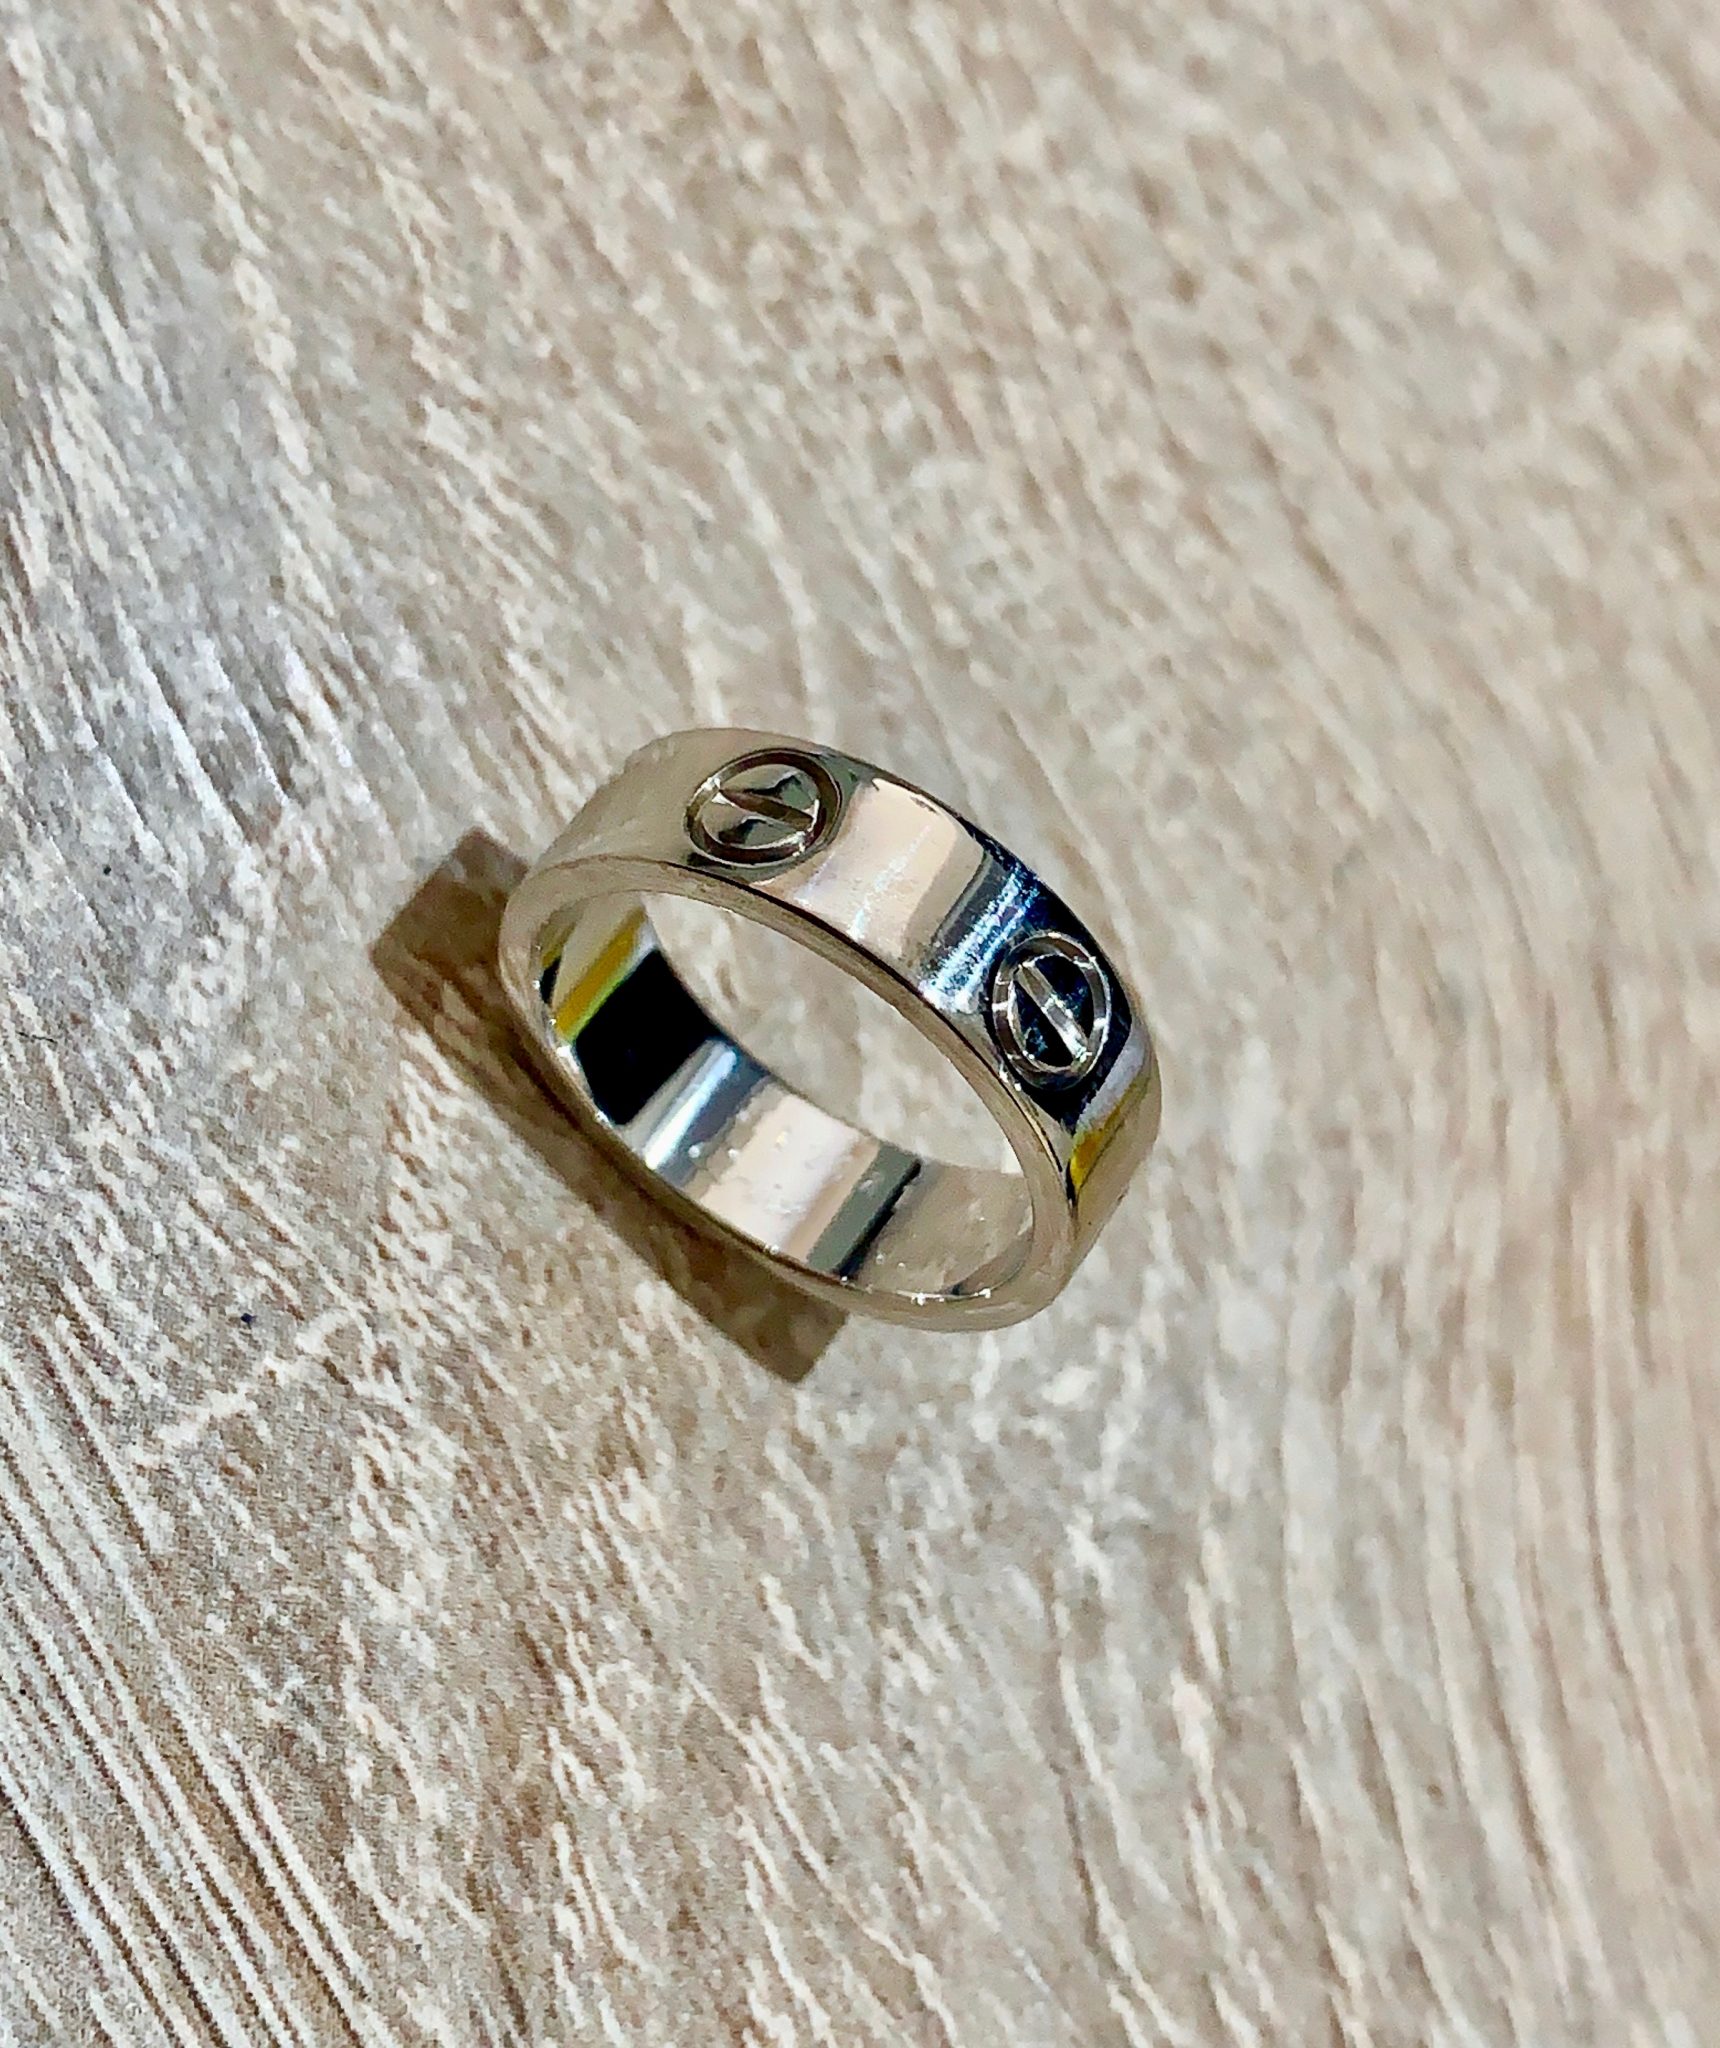 cartier ring size to uk